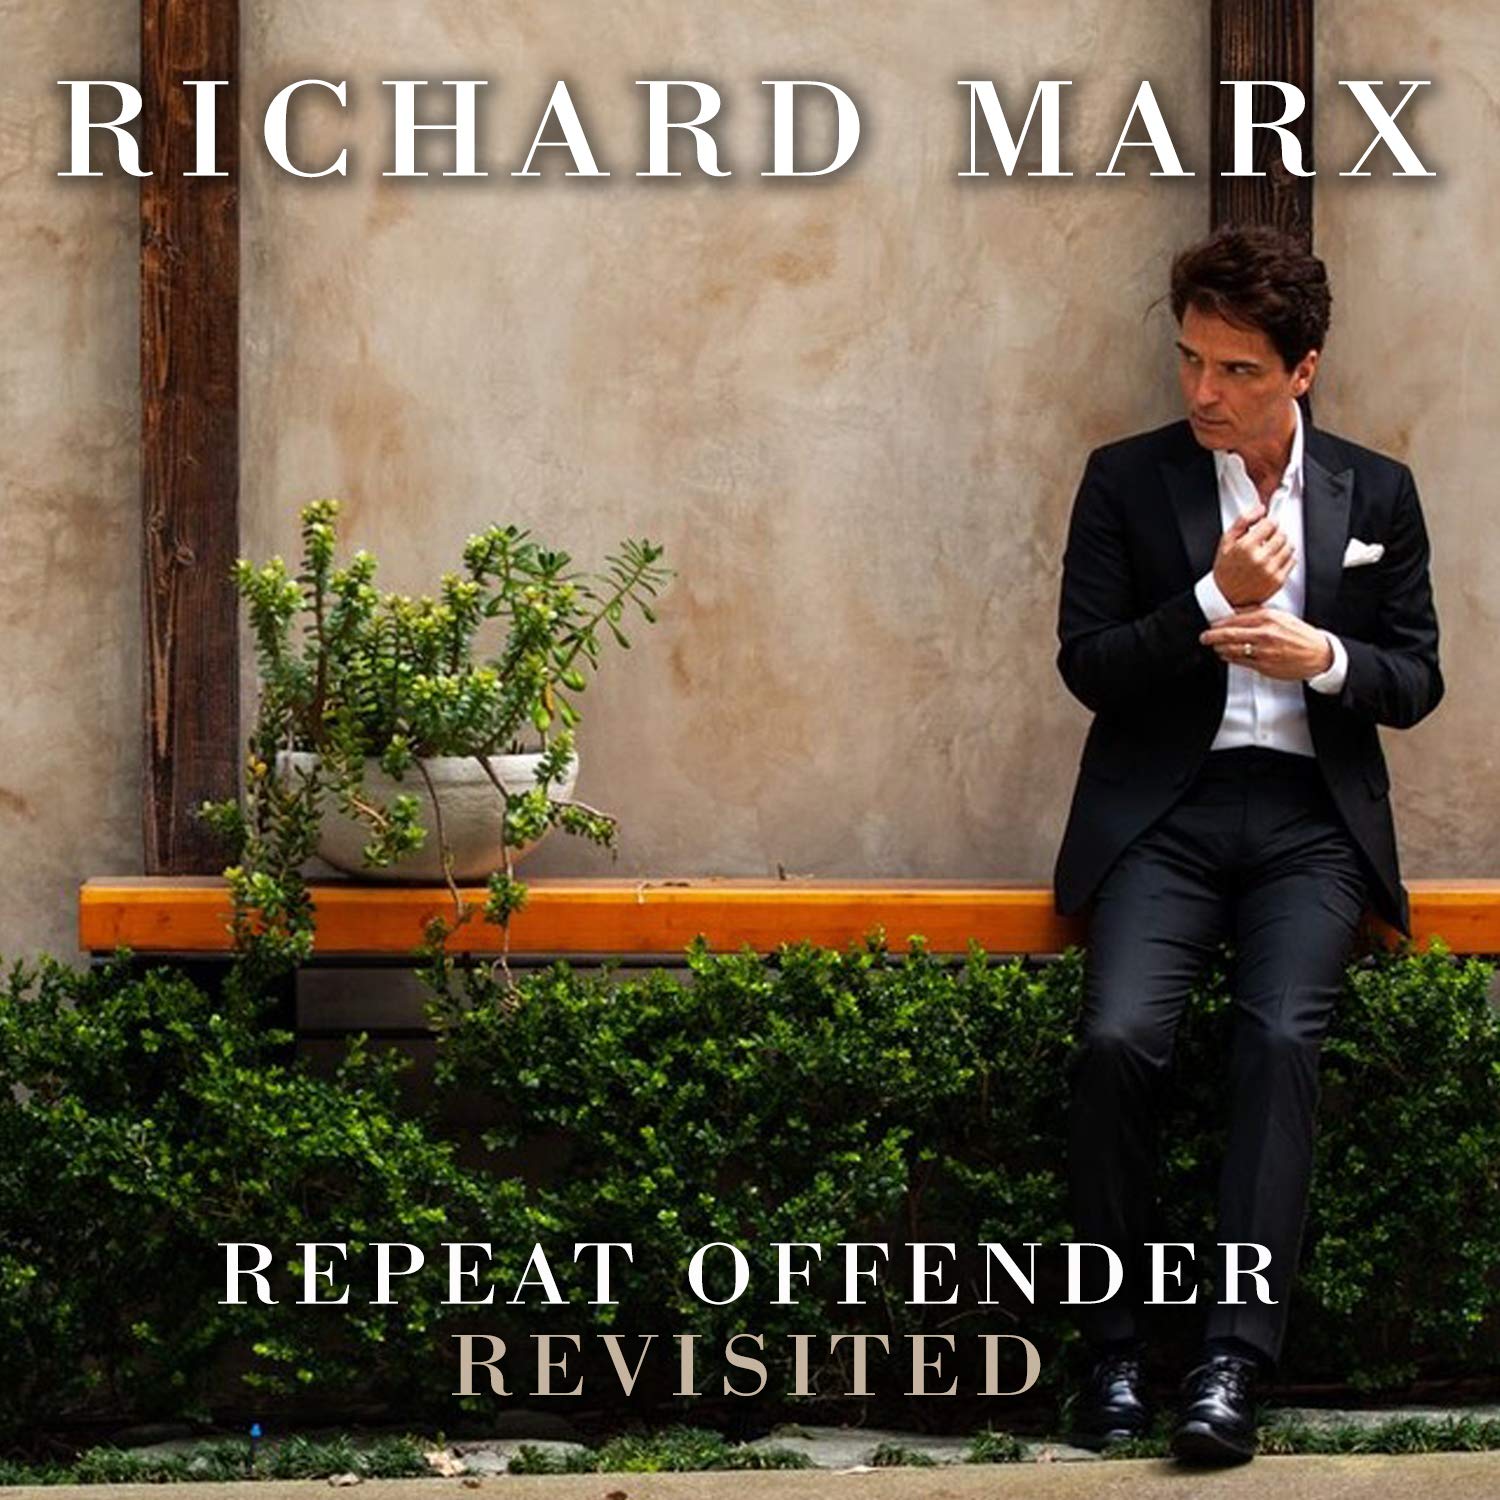 Richard Marx - Repeat Offender Revisited